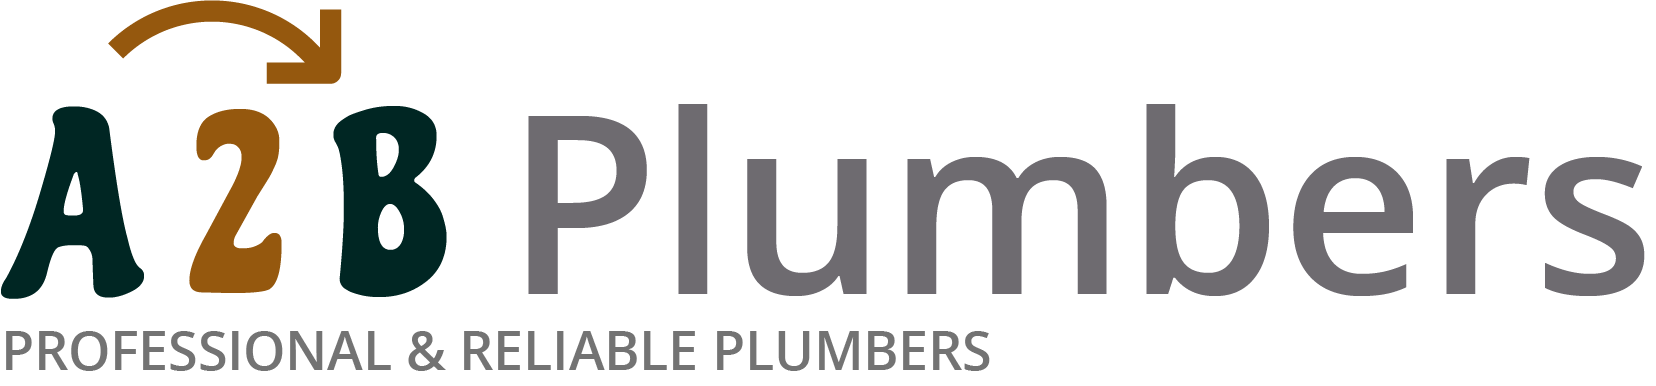 If you need a boiler installed, a radiator repaired or a leaking tap fixed, call us now - we provide services for properties in Buckhurst Hill and the local area.